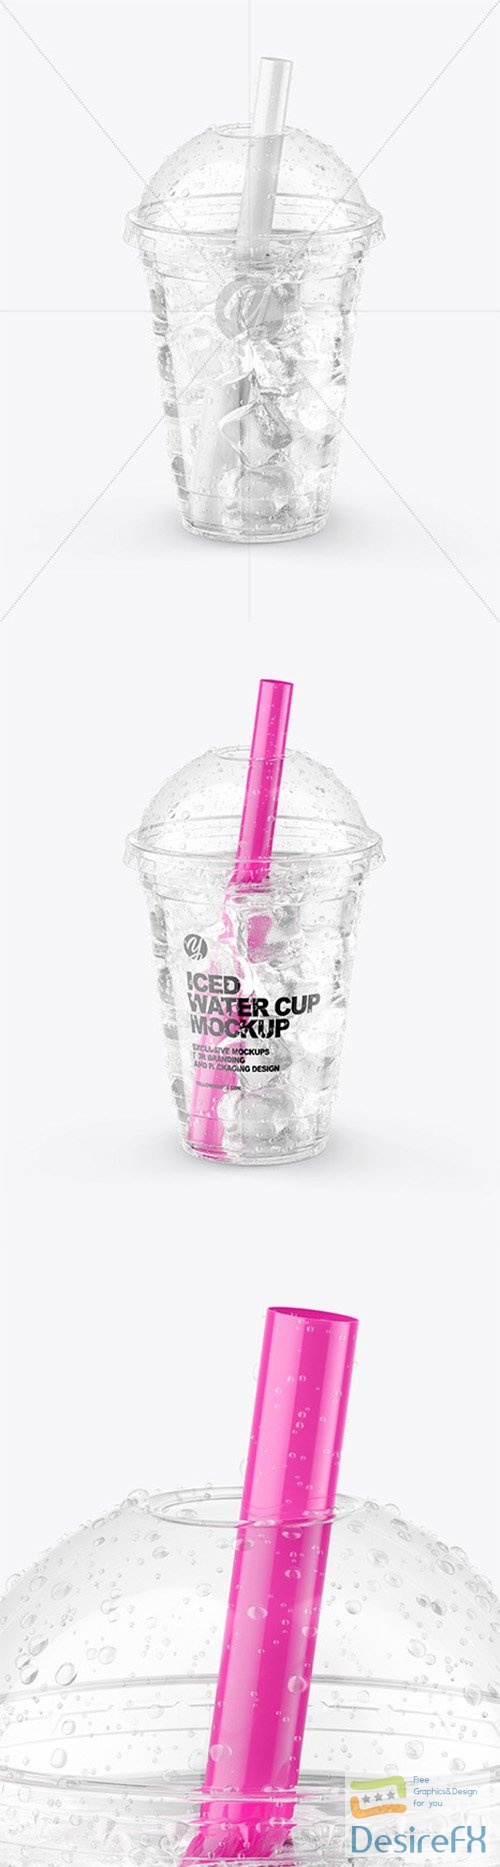 Iced Water Cup Mockup 64946 TIF